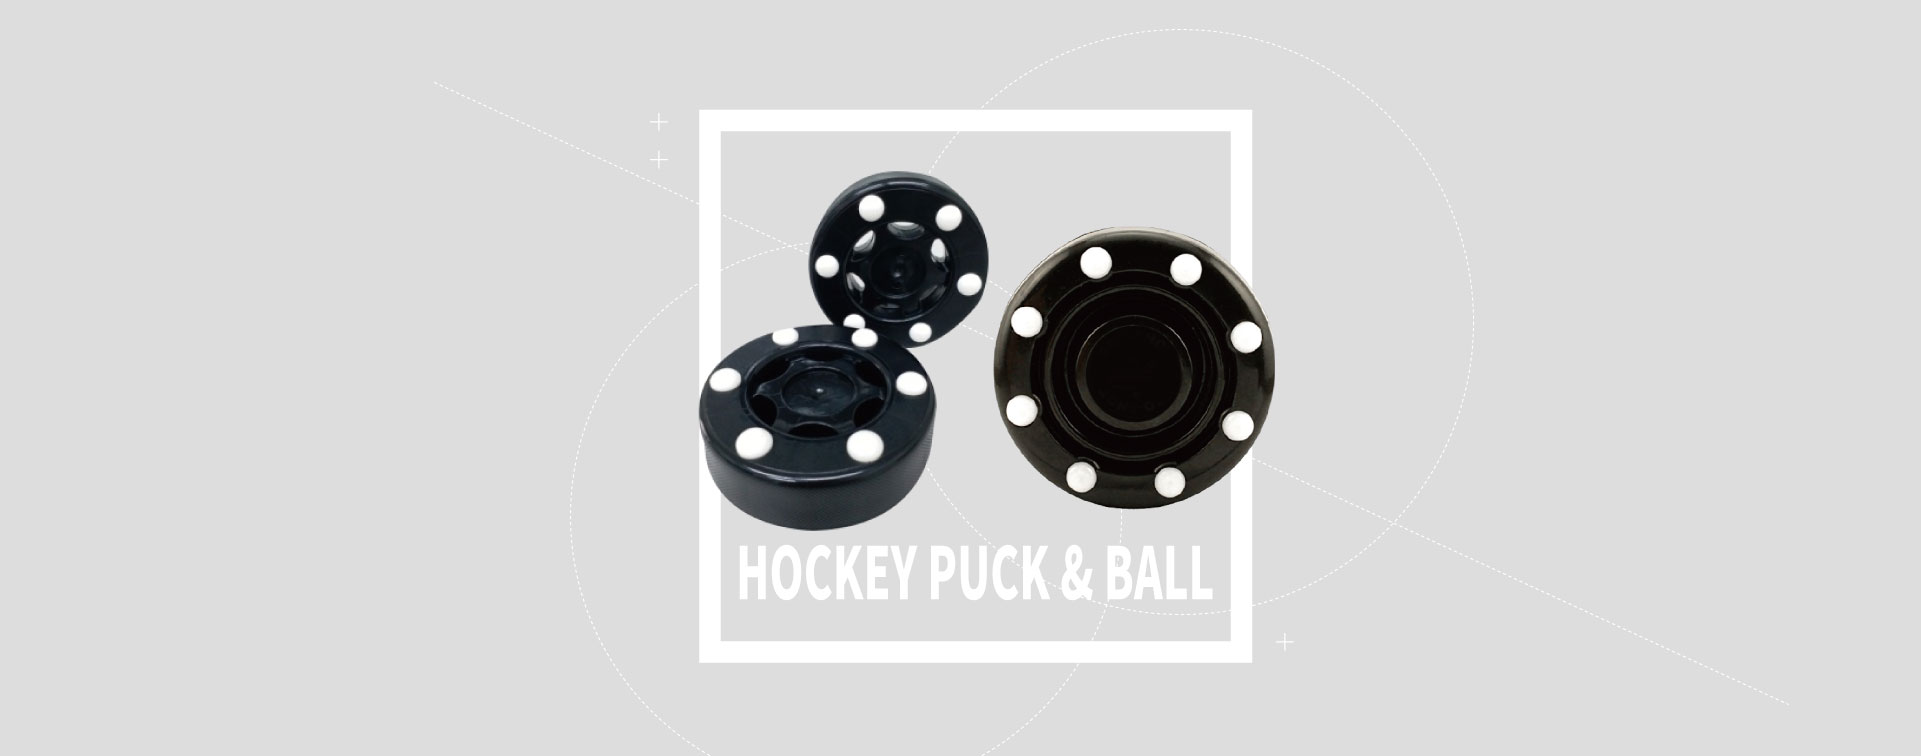 Street Hockey Puck, Inline Hockey Puck, Durable, High Density, Low Friction, Made In Taiwan, Factory, OEM page